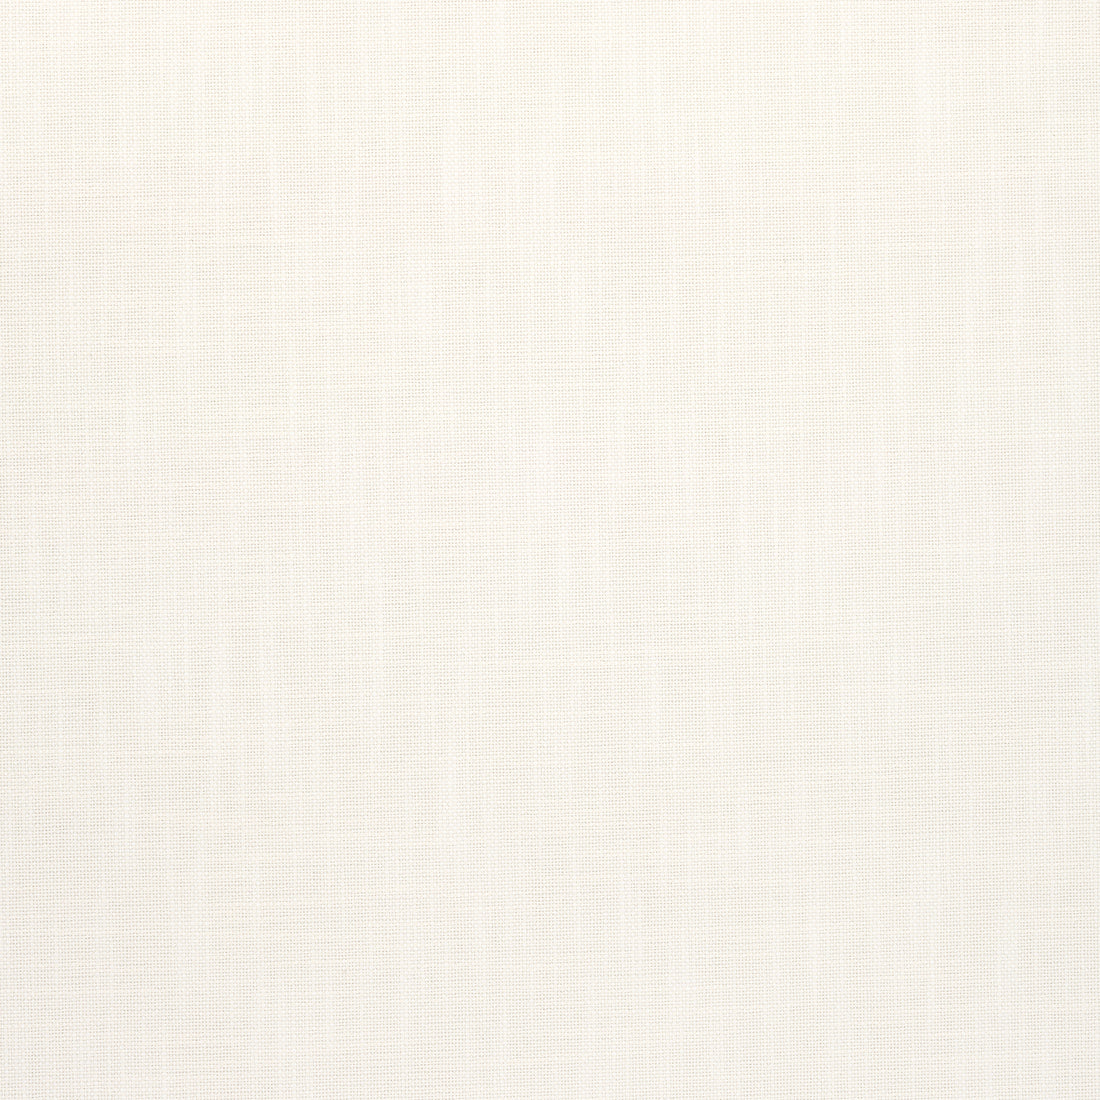 Bristol fabric in ivory color - pattern number W73417 - by Thibaut in the Landmark Textures collection